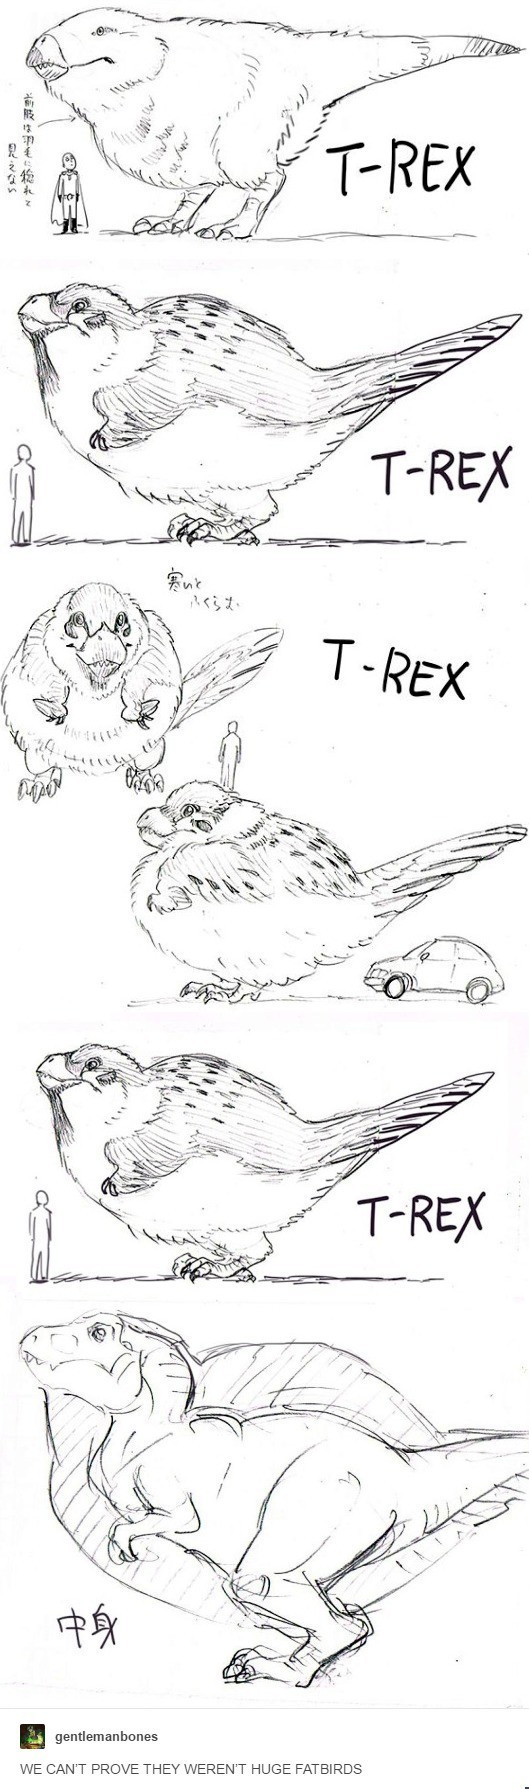 We have no evidence that they weren't giant fat birds. - Birds, Tyrannosaurus, Dinosaurs, Sketch, Drawing, Why not?, Longpost